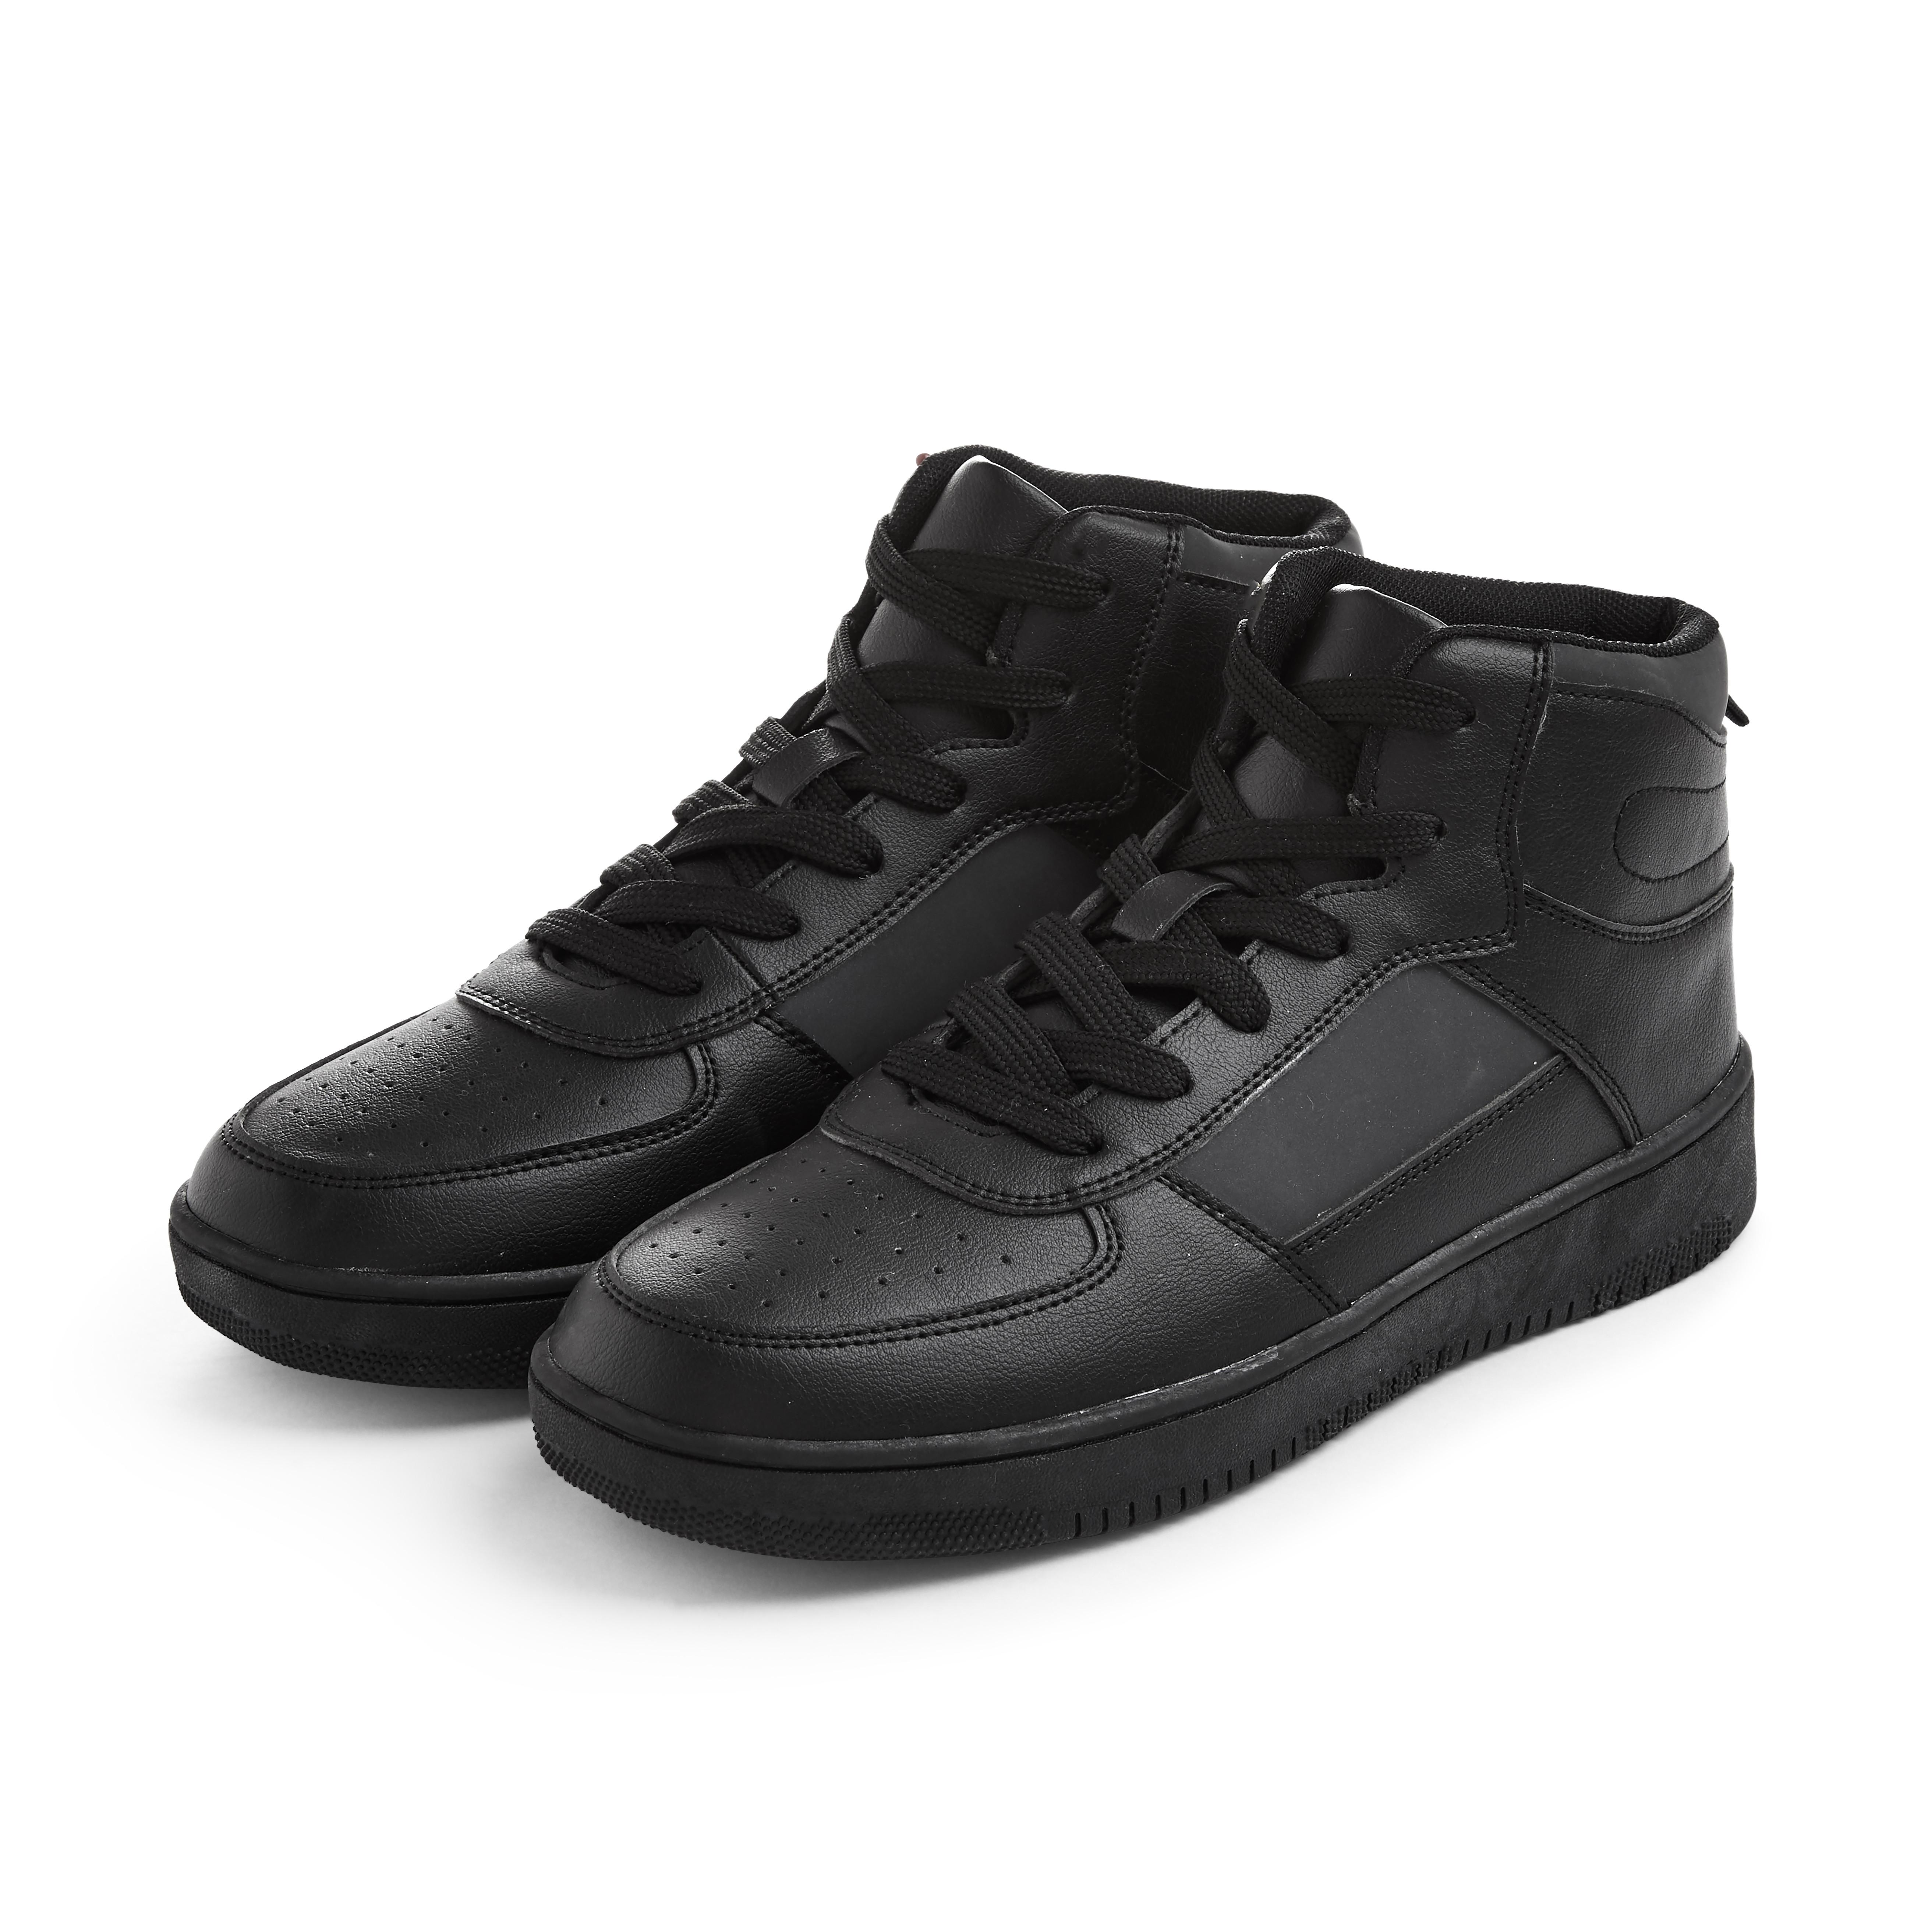 Older Boy Black Sporty High Top Trainers | Boys Shoes | Boys Clothes ...